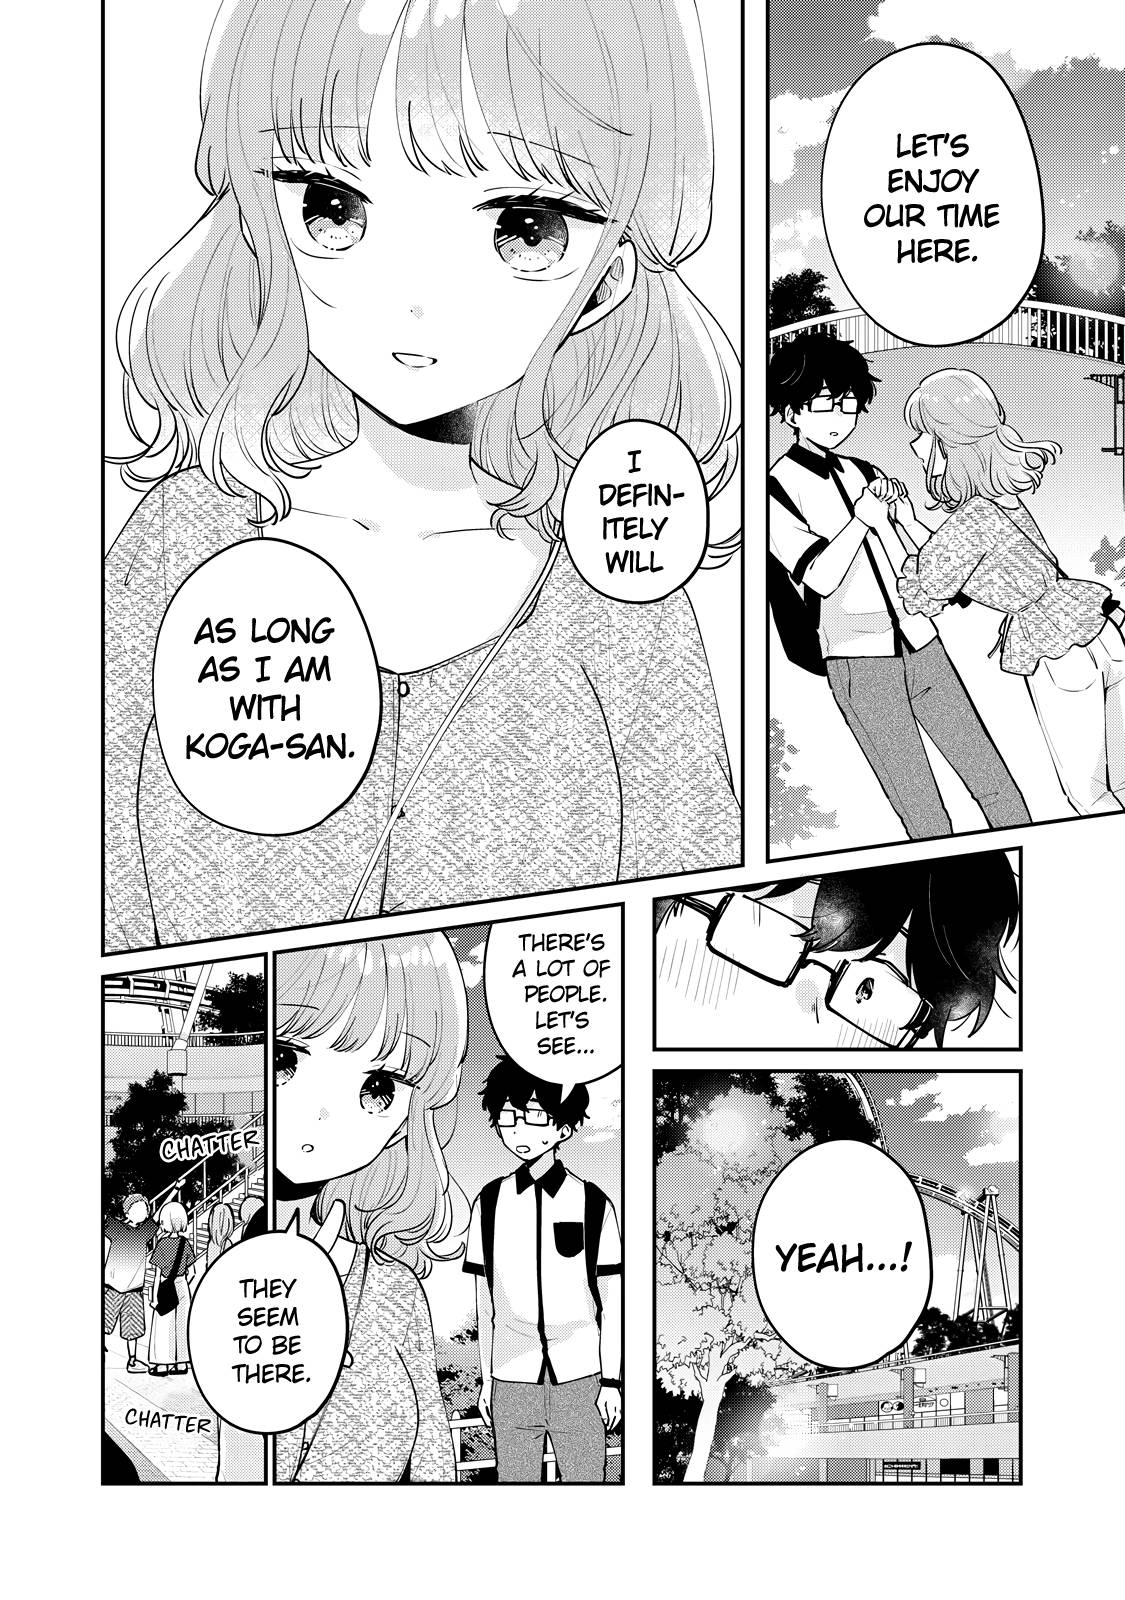 It's Not Meguro-san's First Time chapter 64 page 3